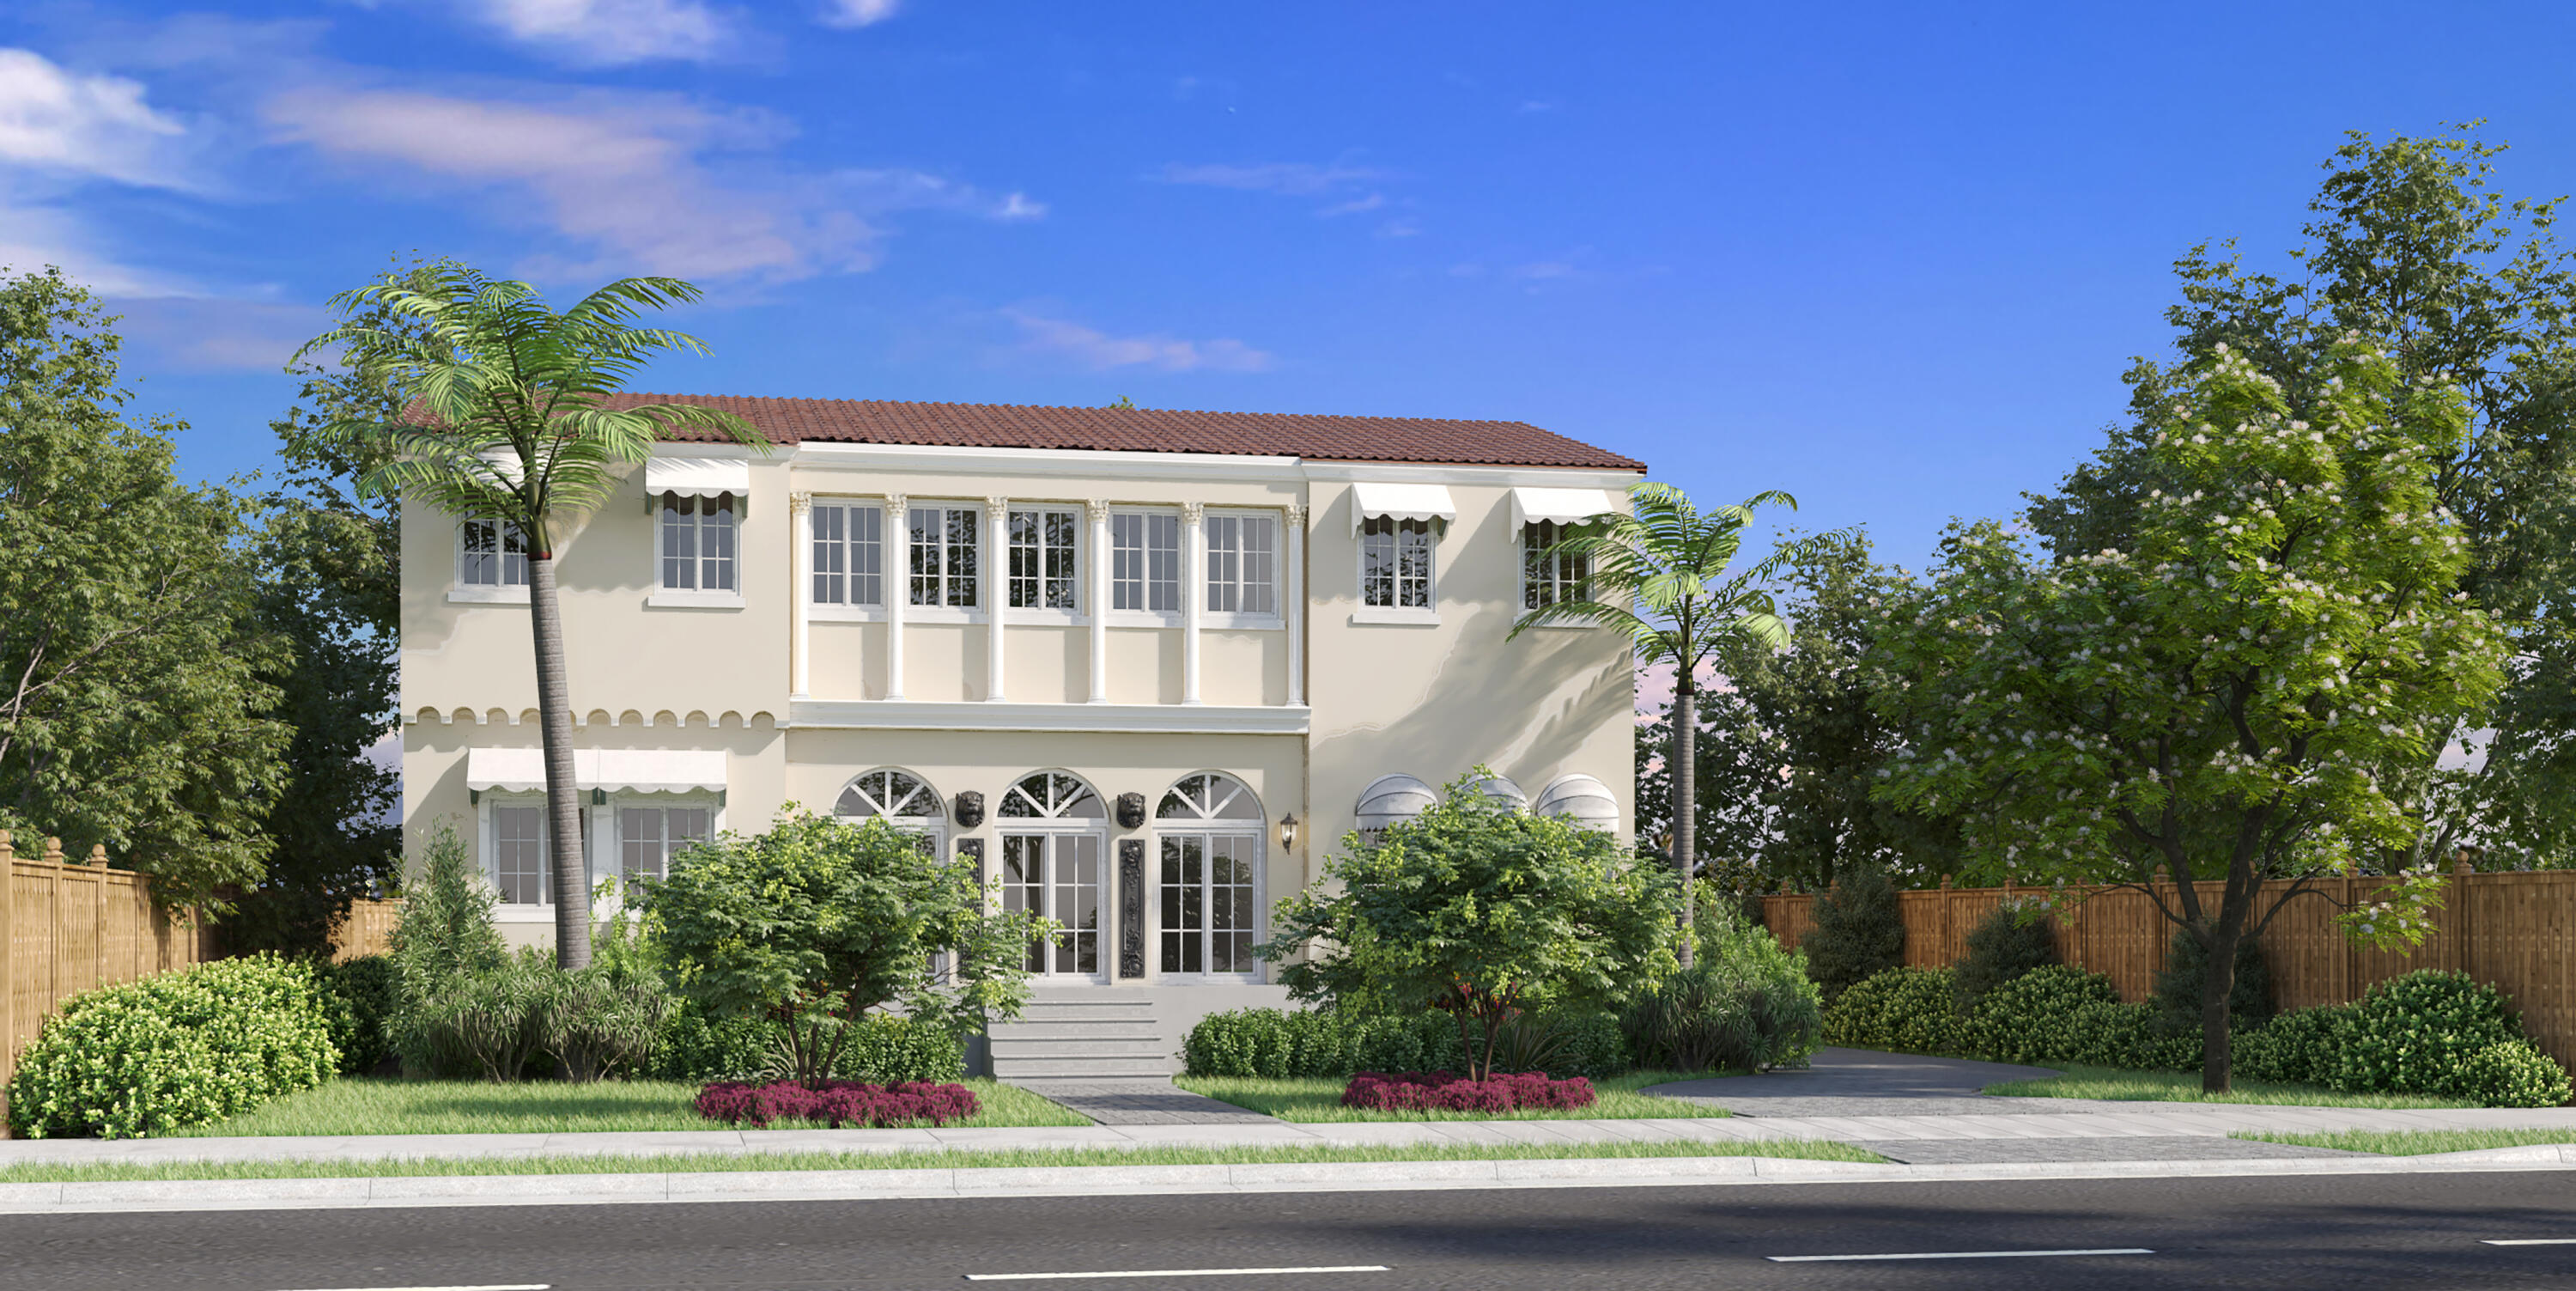 432 Ardmore Road, West Palm Beach, Palm Beach County, Florida - 4 Bedrooms  
2.5 Bathrooms - 